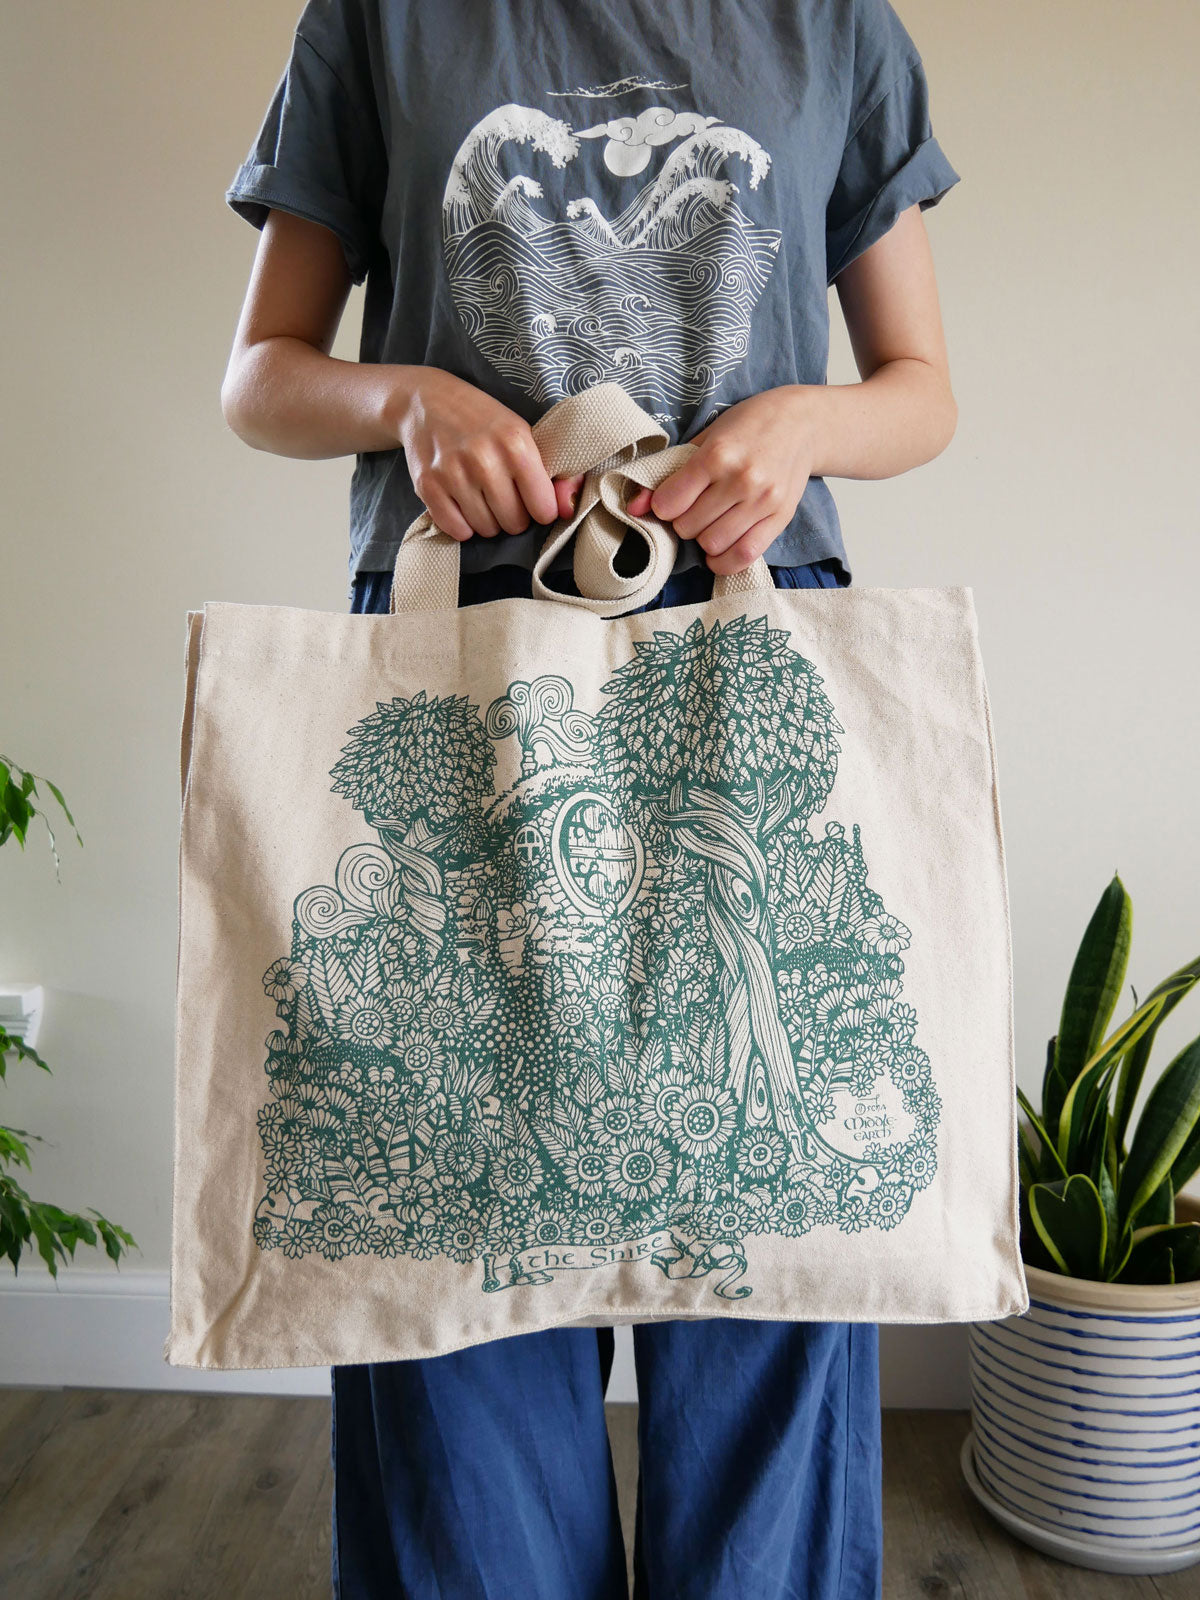 Buy Earthbags Cotton Canvas Shopping Bag/Carry Bag - White Printed